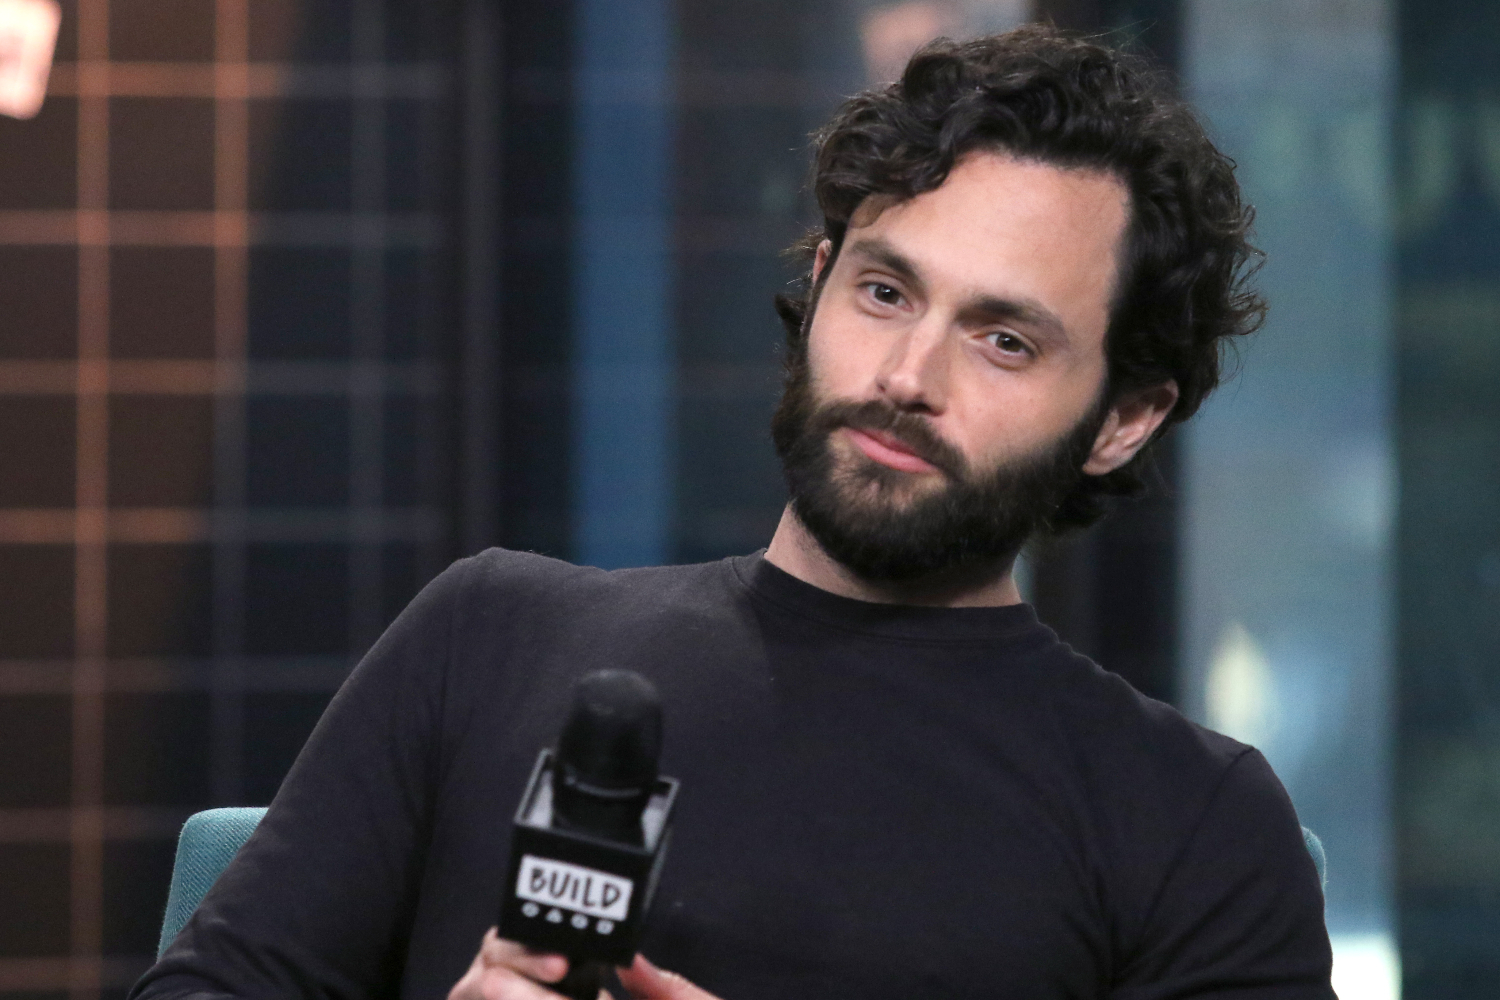 Actor Penn Badgley attends the Build Series to discuss his show "You" at Build Studio on January 09, 2020 in New York City.